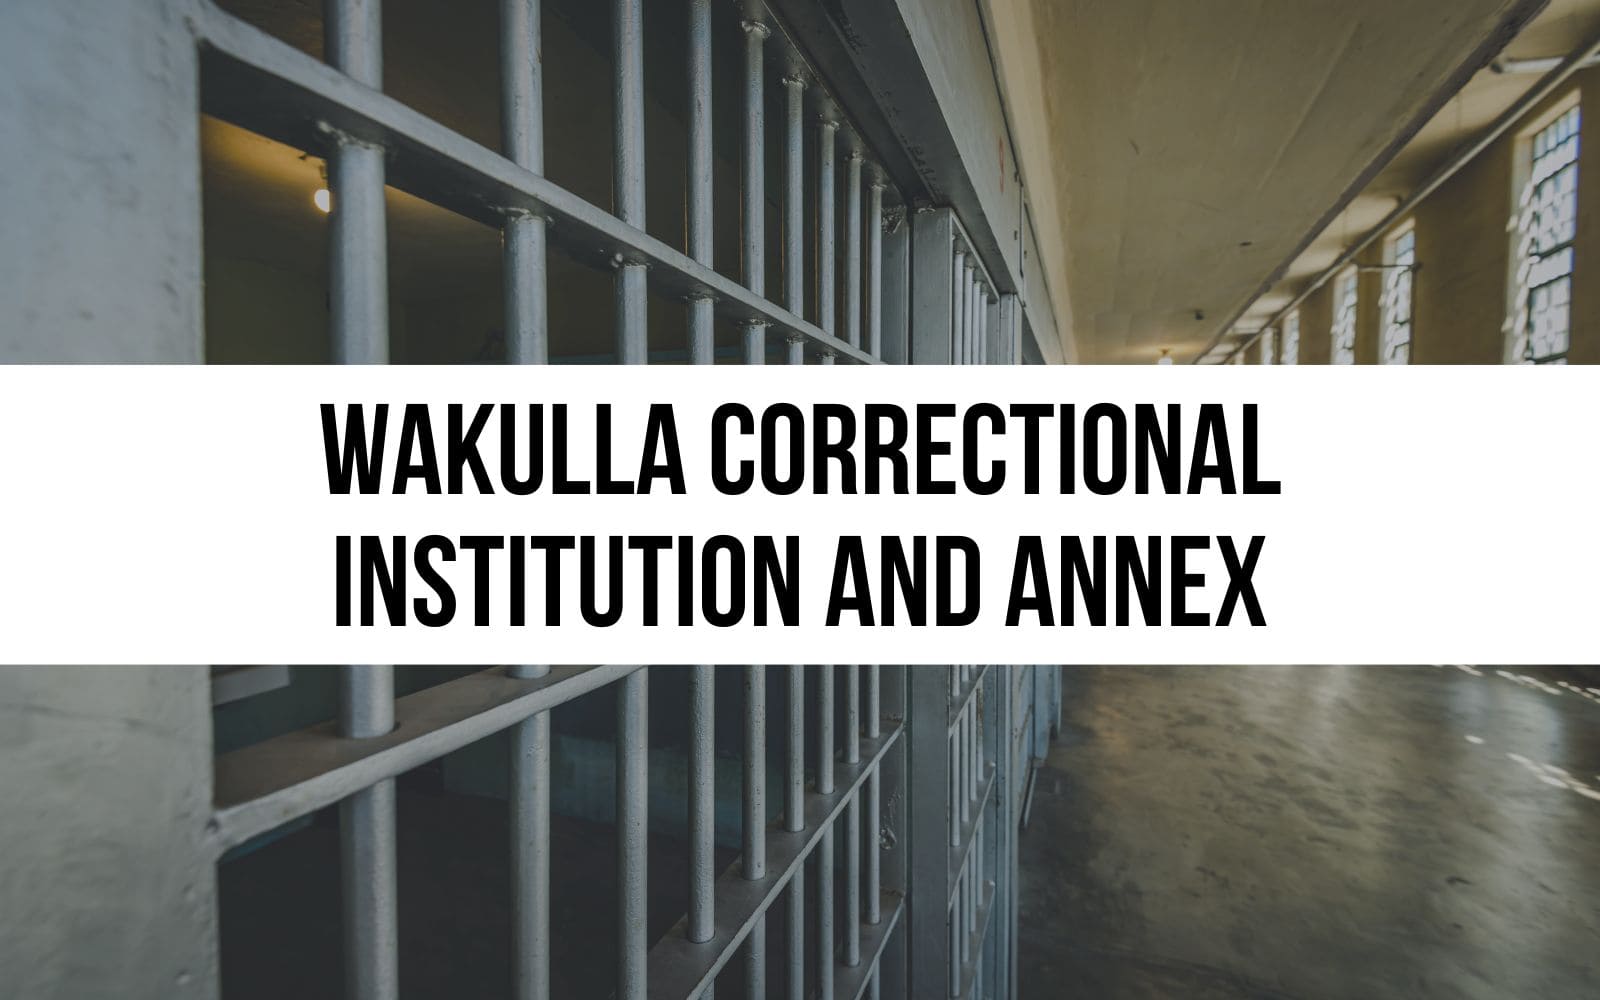 Wakulla Correctional Institution and Annex